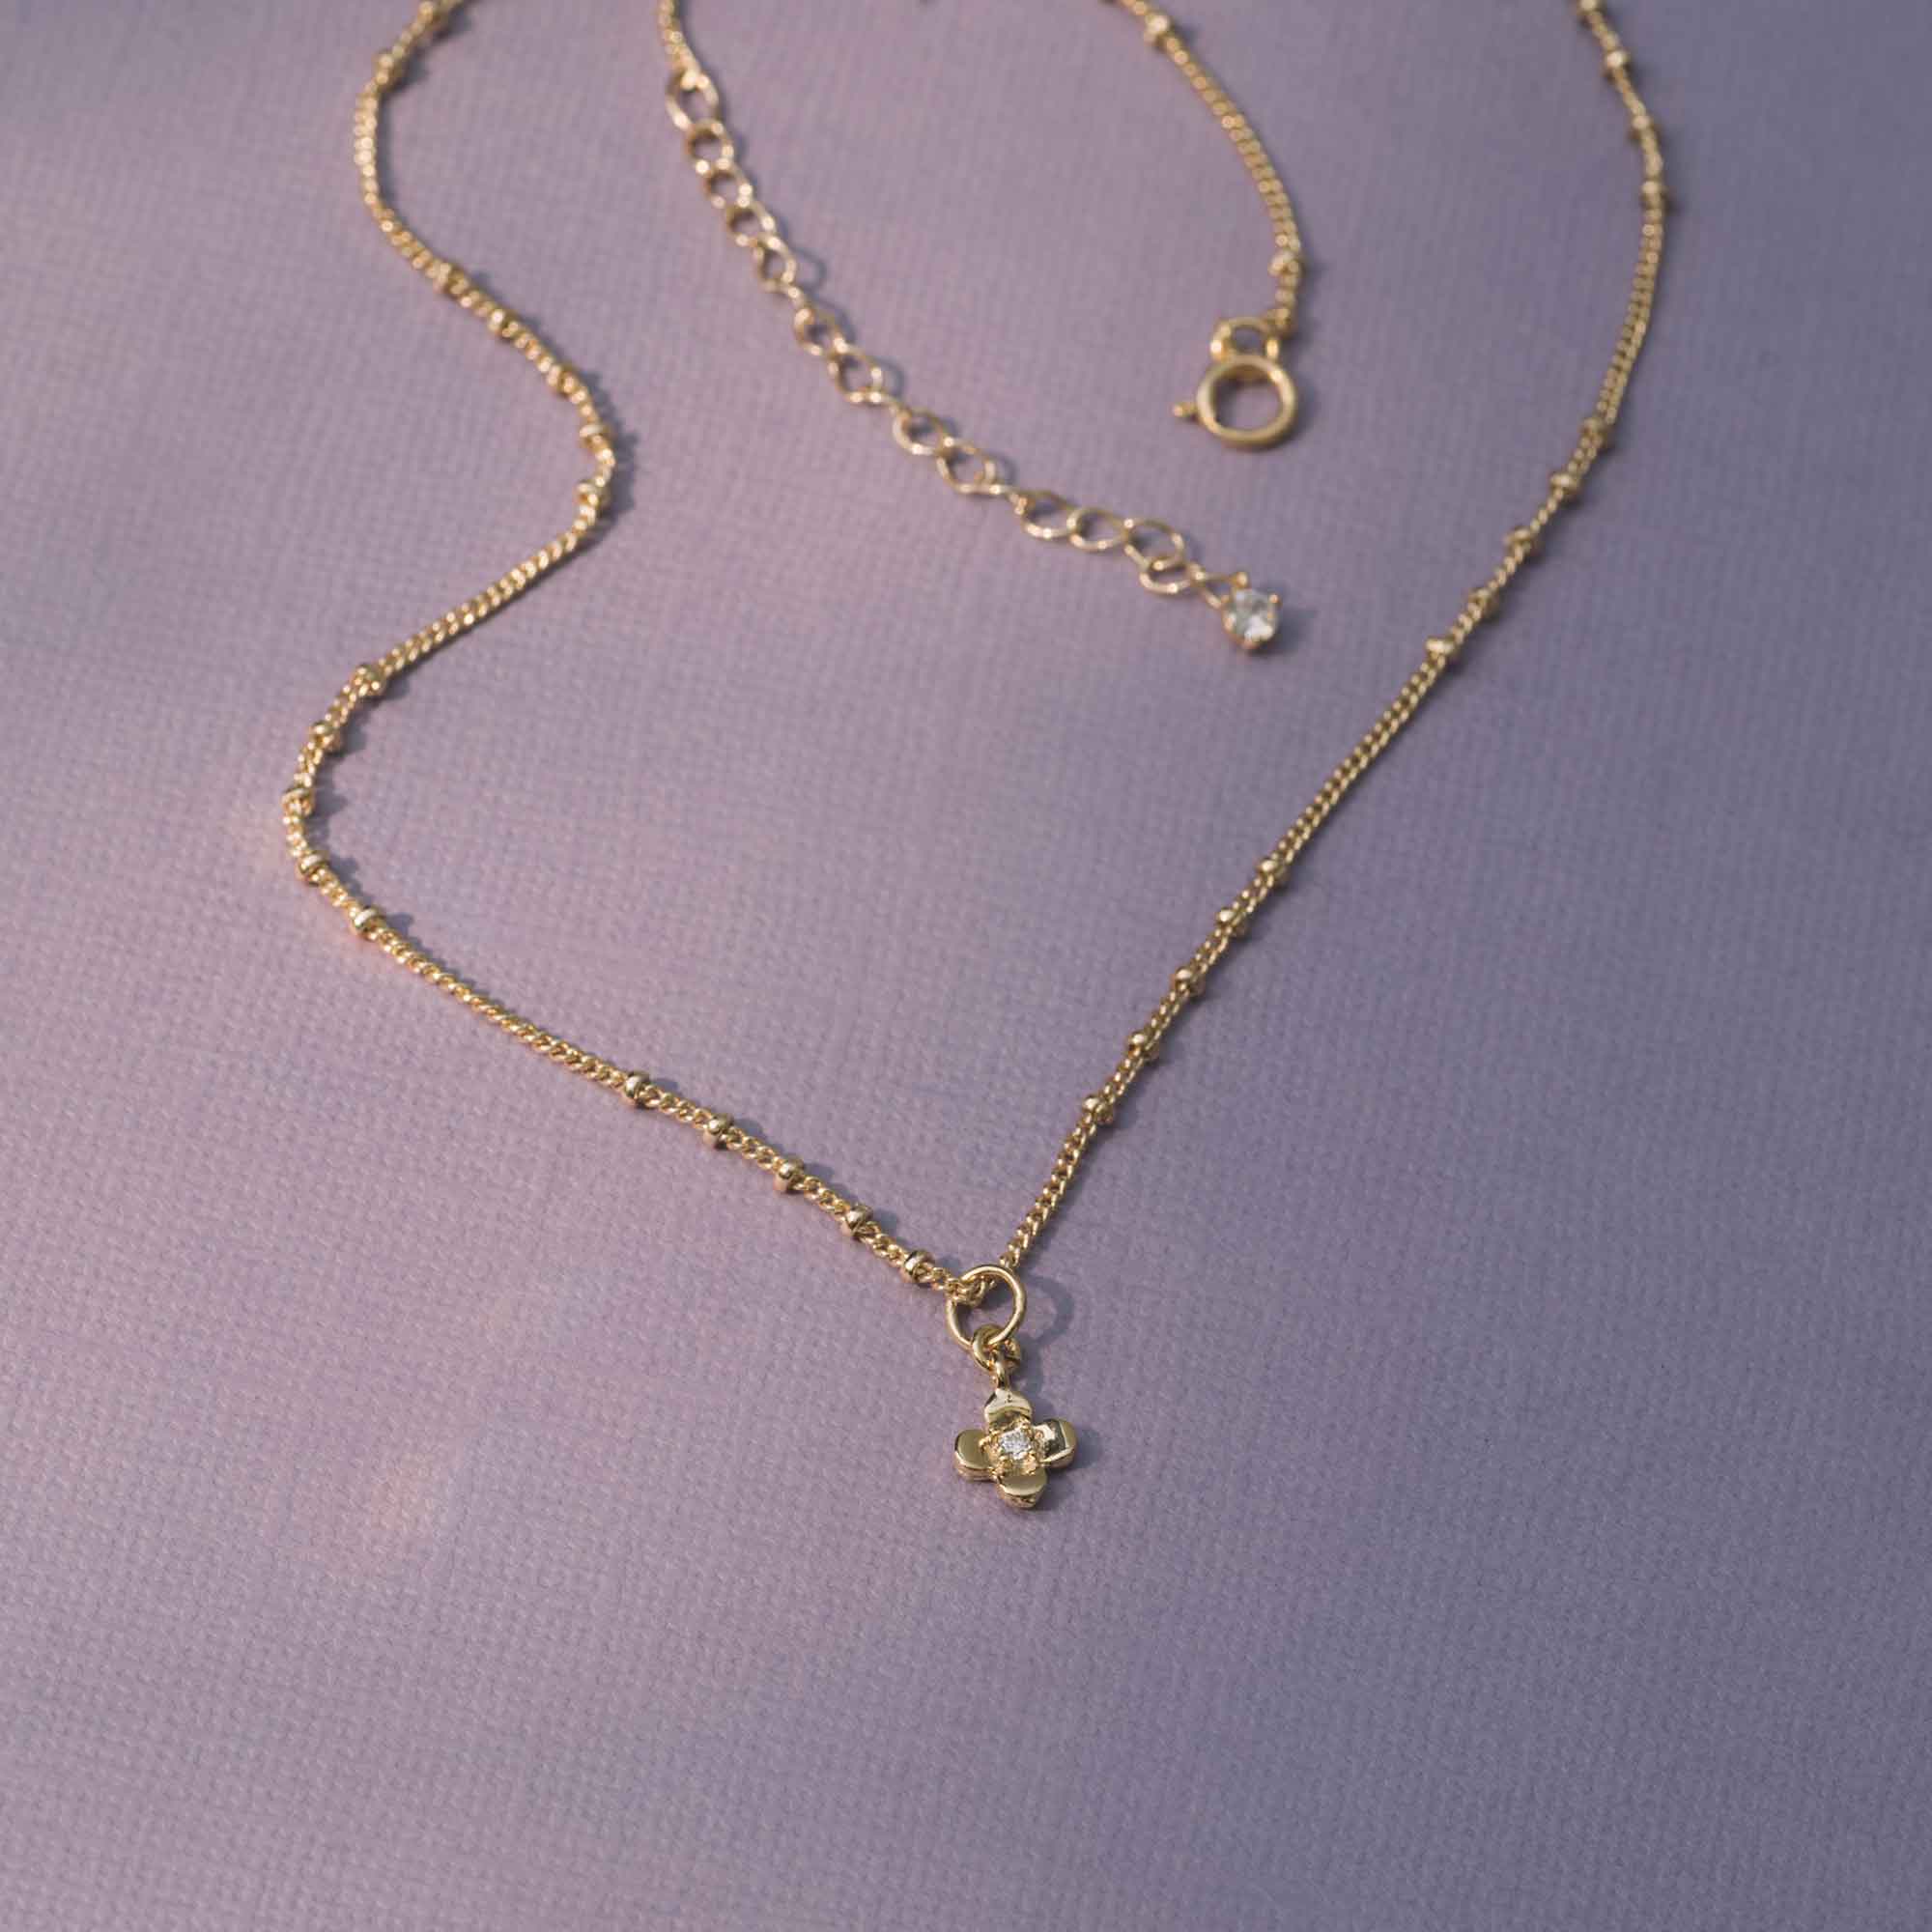 flower charm necklace gold filled 